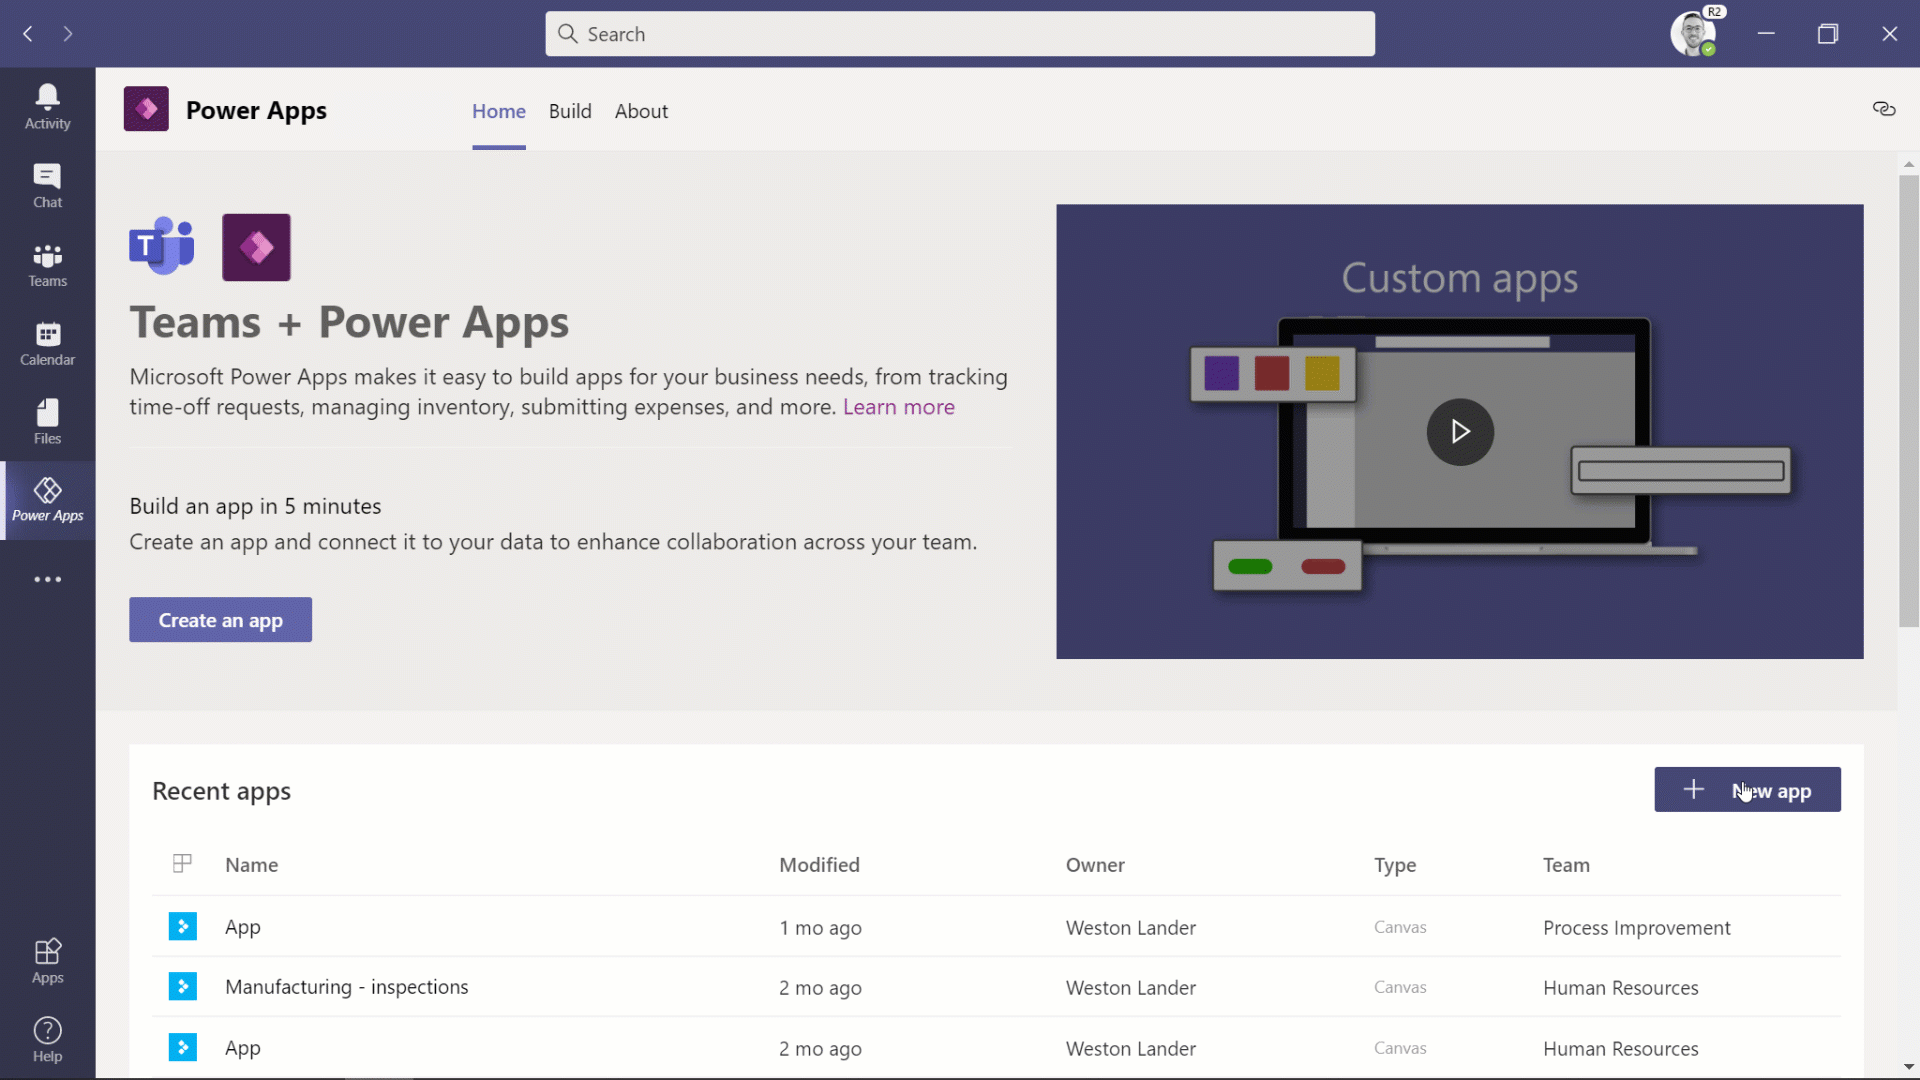 GIF image showing the home screen and then the maker studio of the Power Apps app for teams, including showing a few elements being added to the canvas of the app